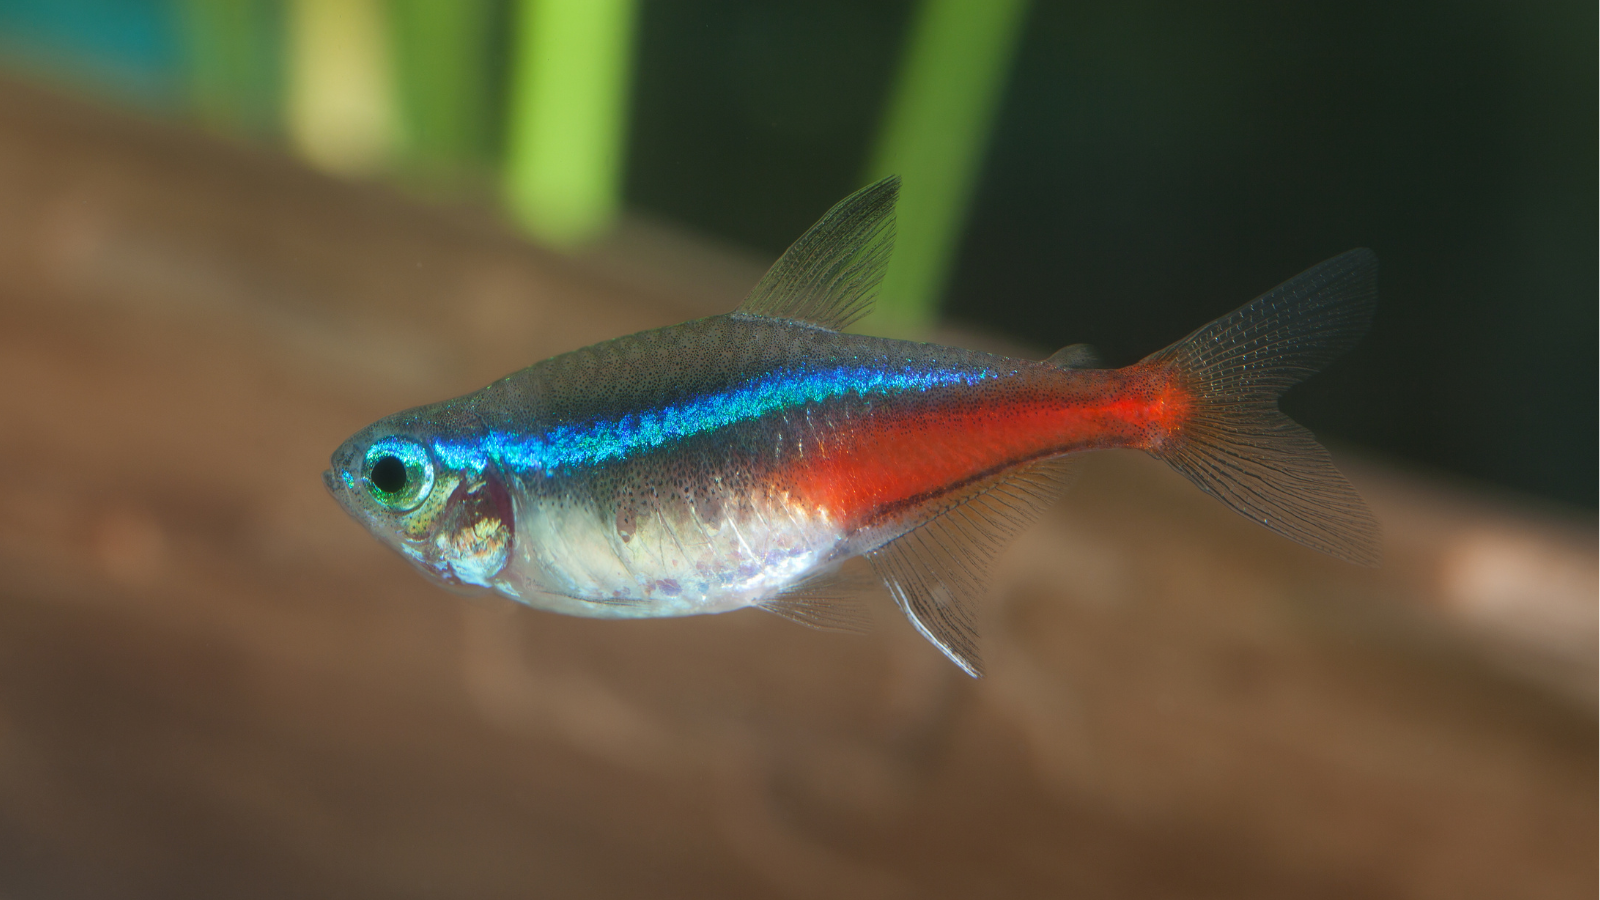 Neon Tetra do especially well in dark water with tannin from leaf litter and bogwood.